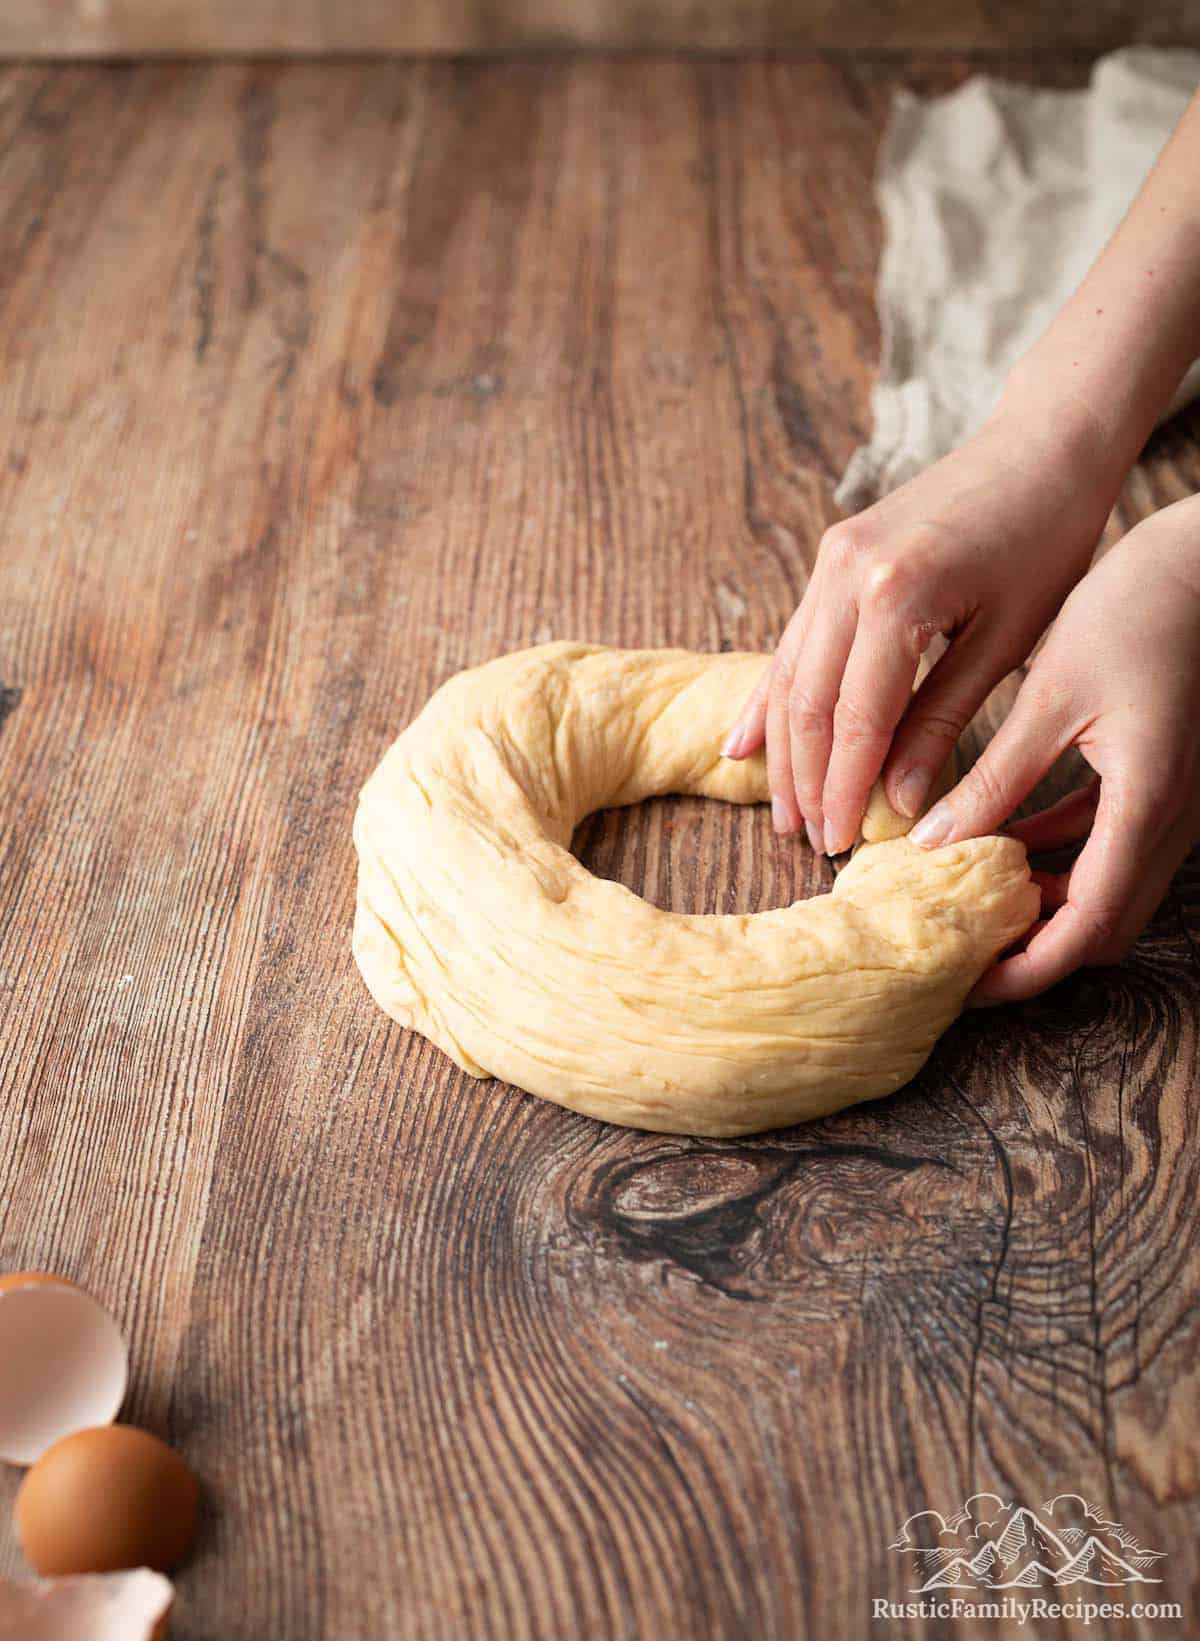 A roll of dough being formed into a circle